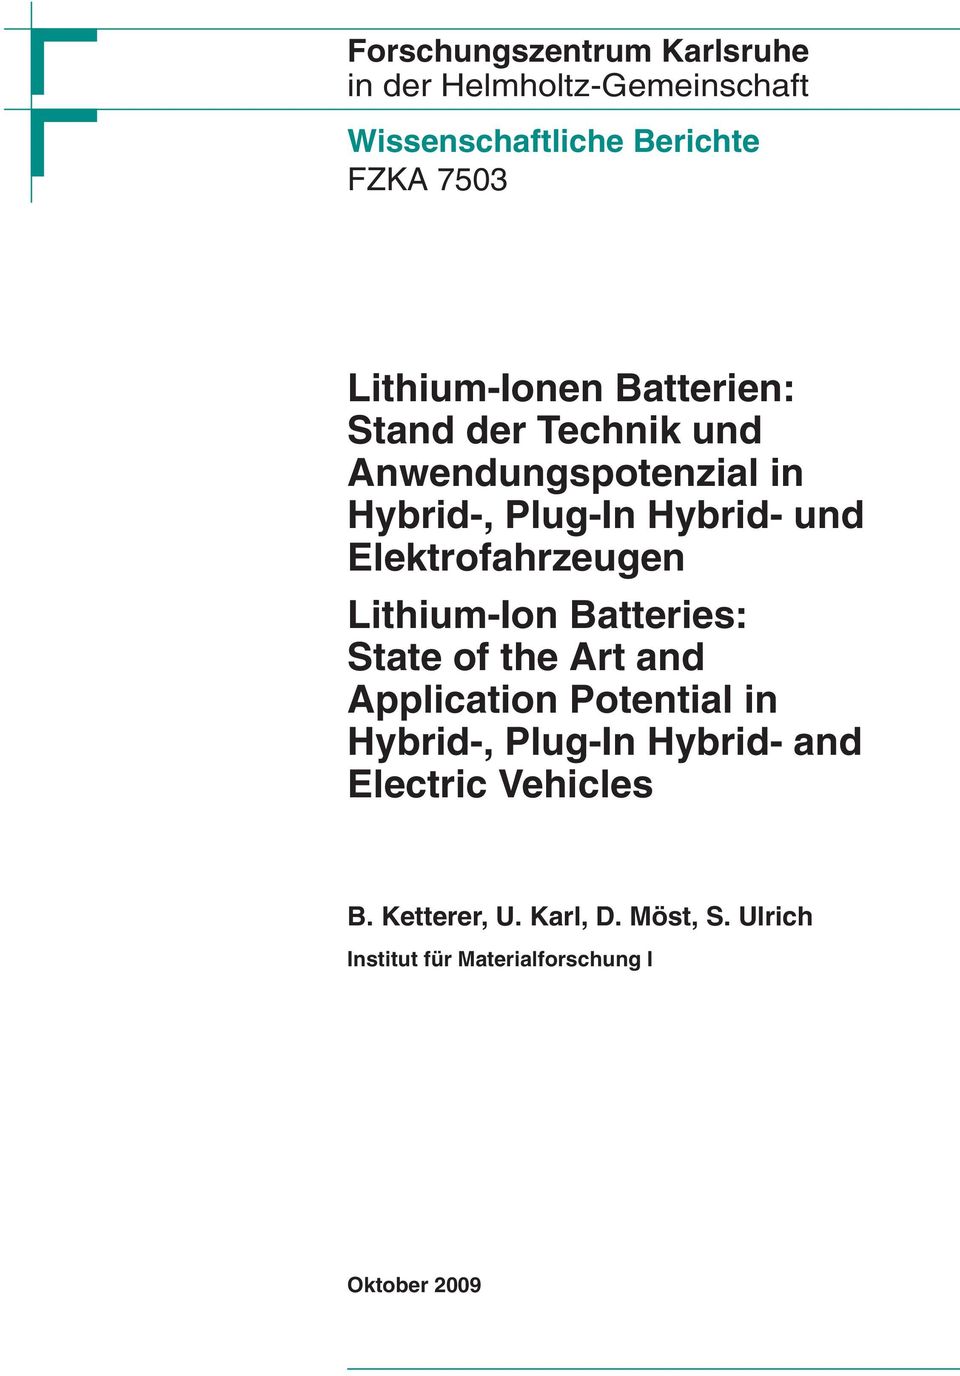 Elektrofahrzeugen Lithium-Ion Batteries: State of the Art and Application Potential in Hybrid-, Plug-In